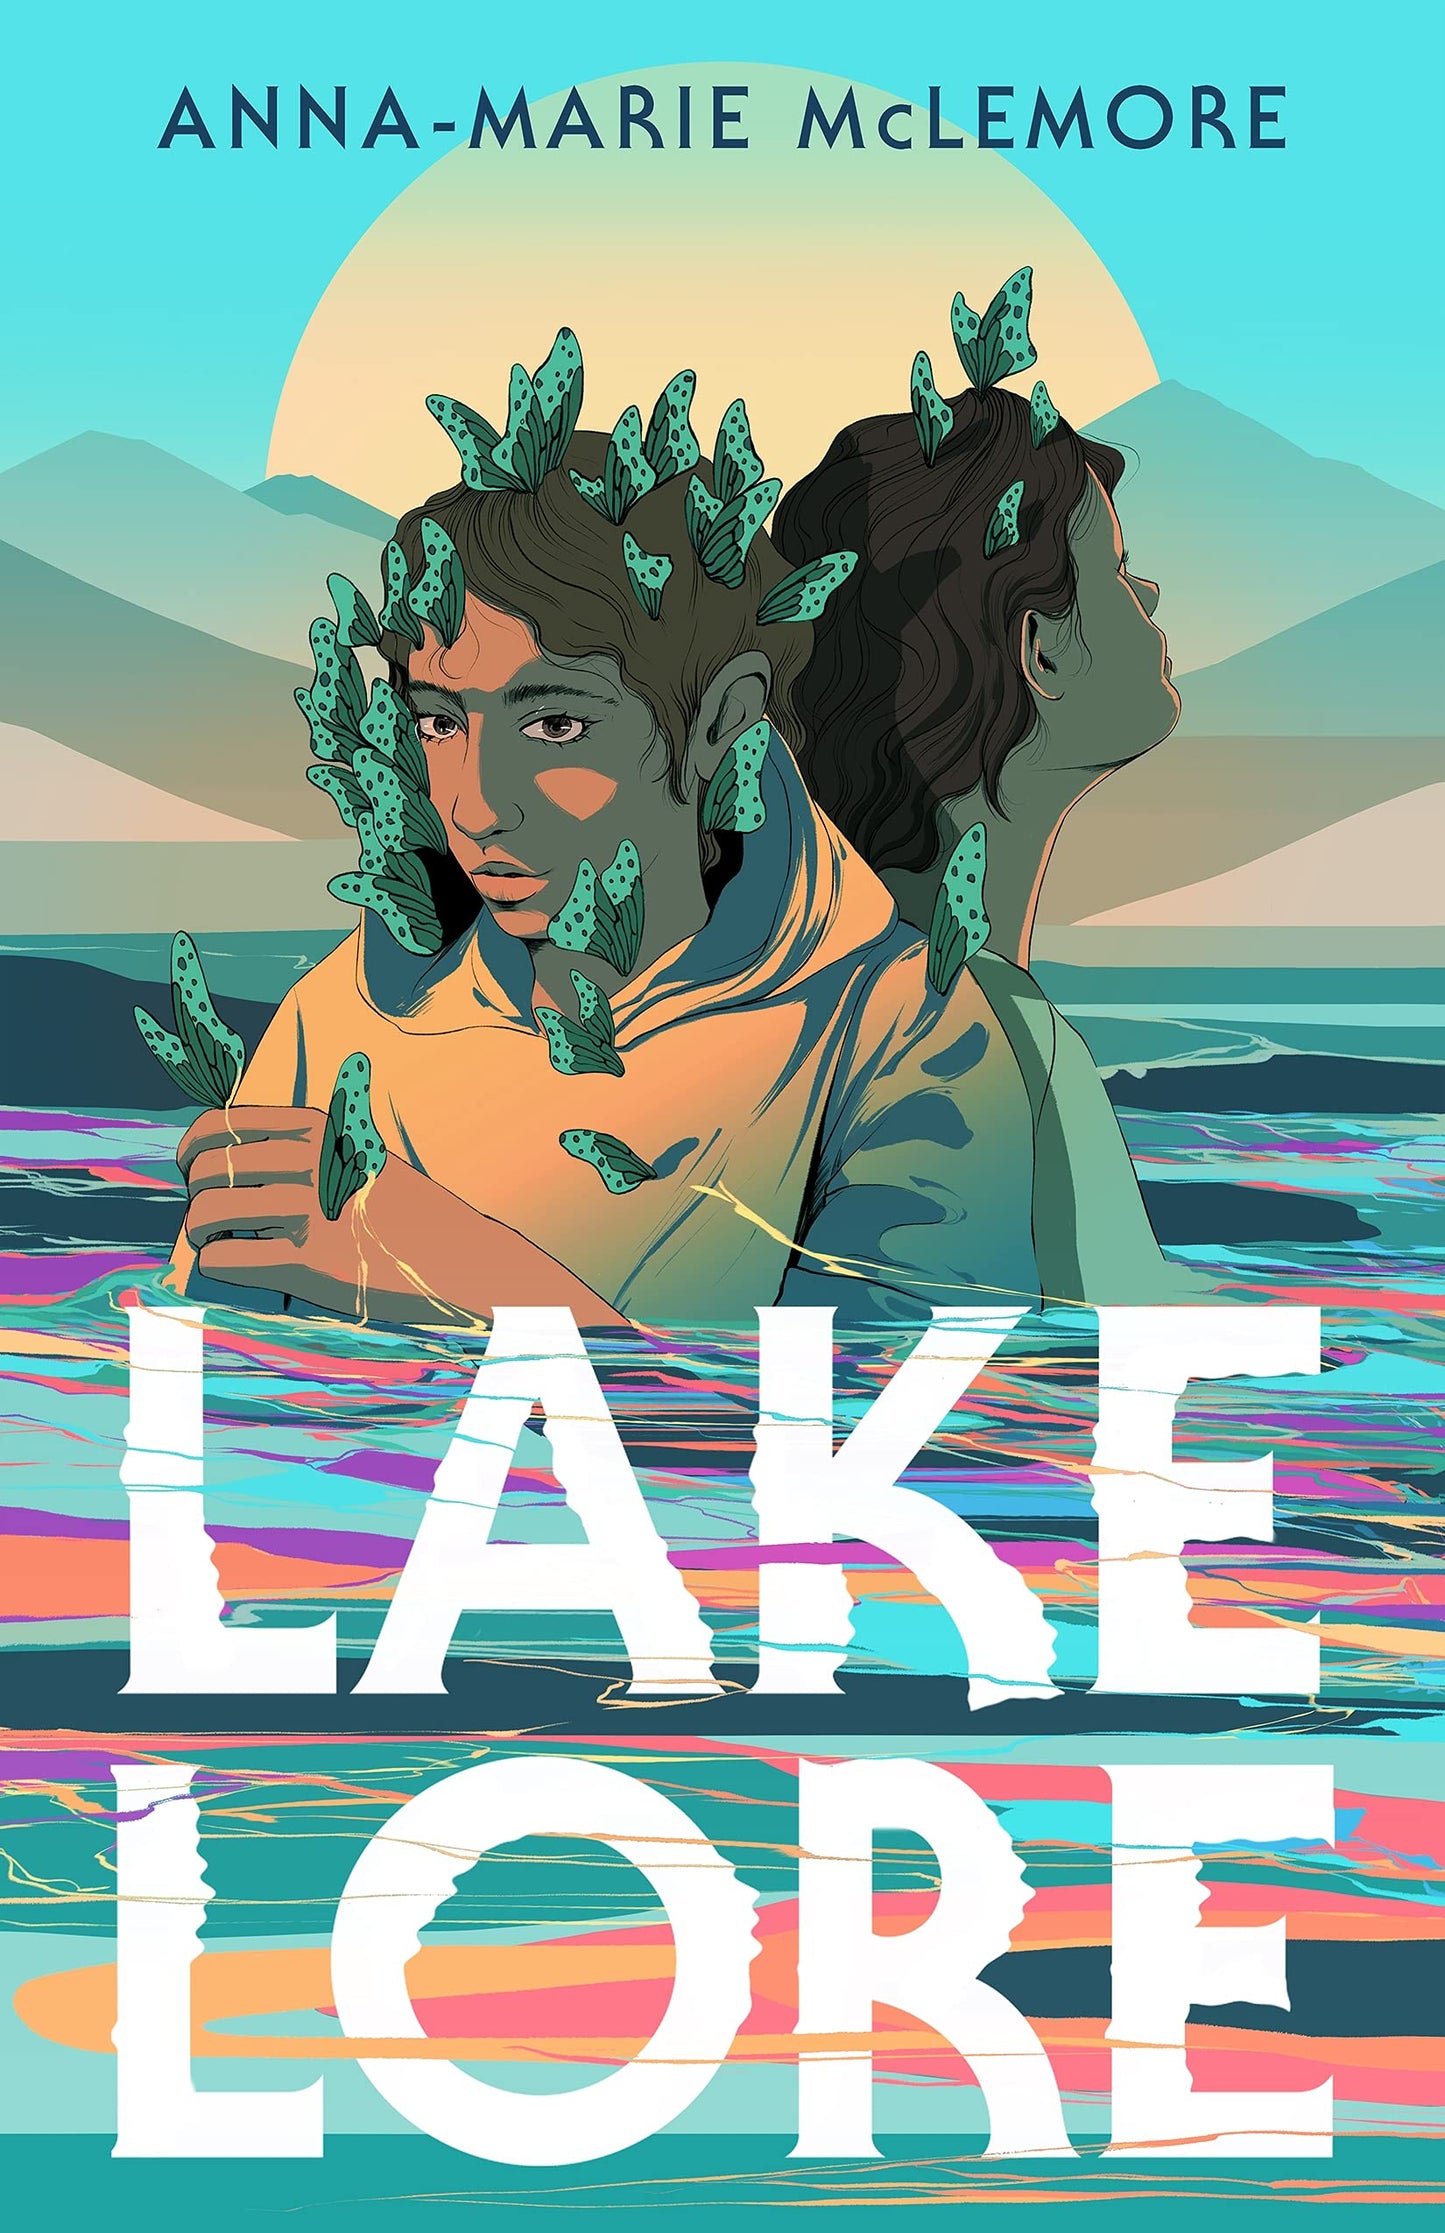 Lakelore by Anna-Marie Mclemore